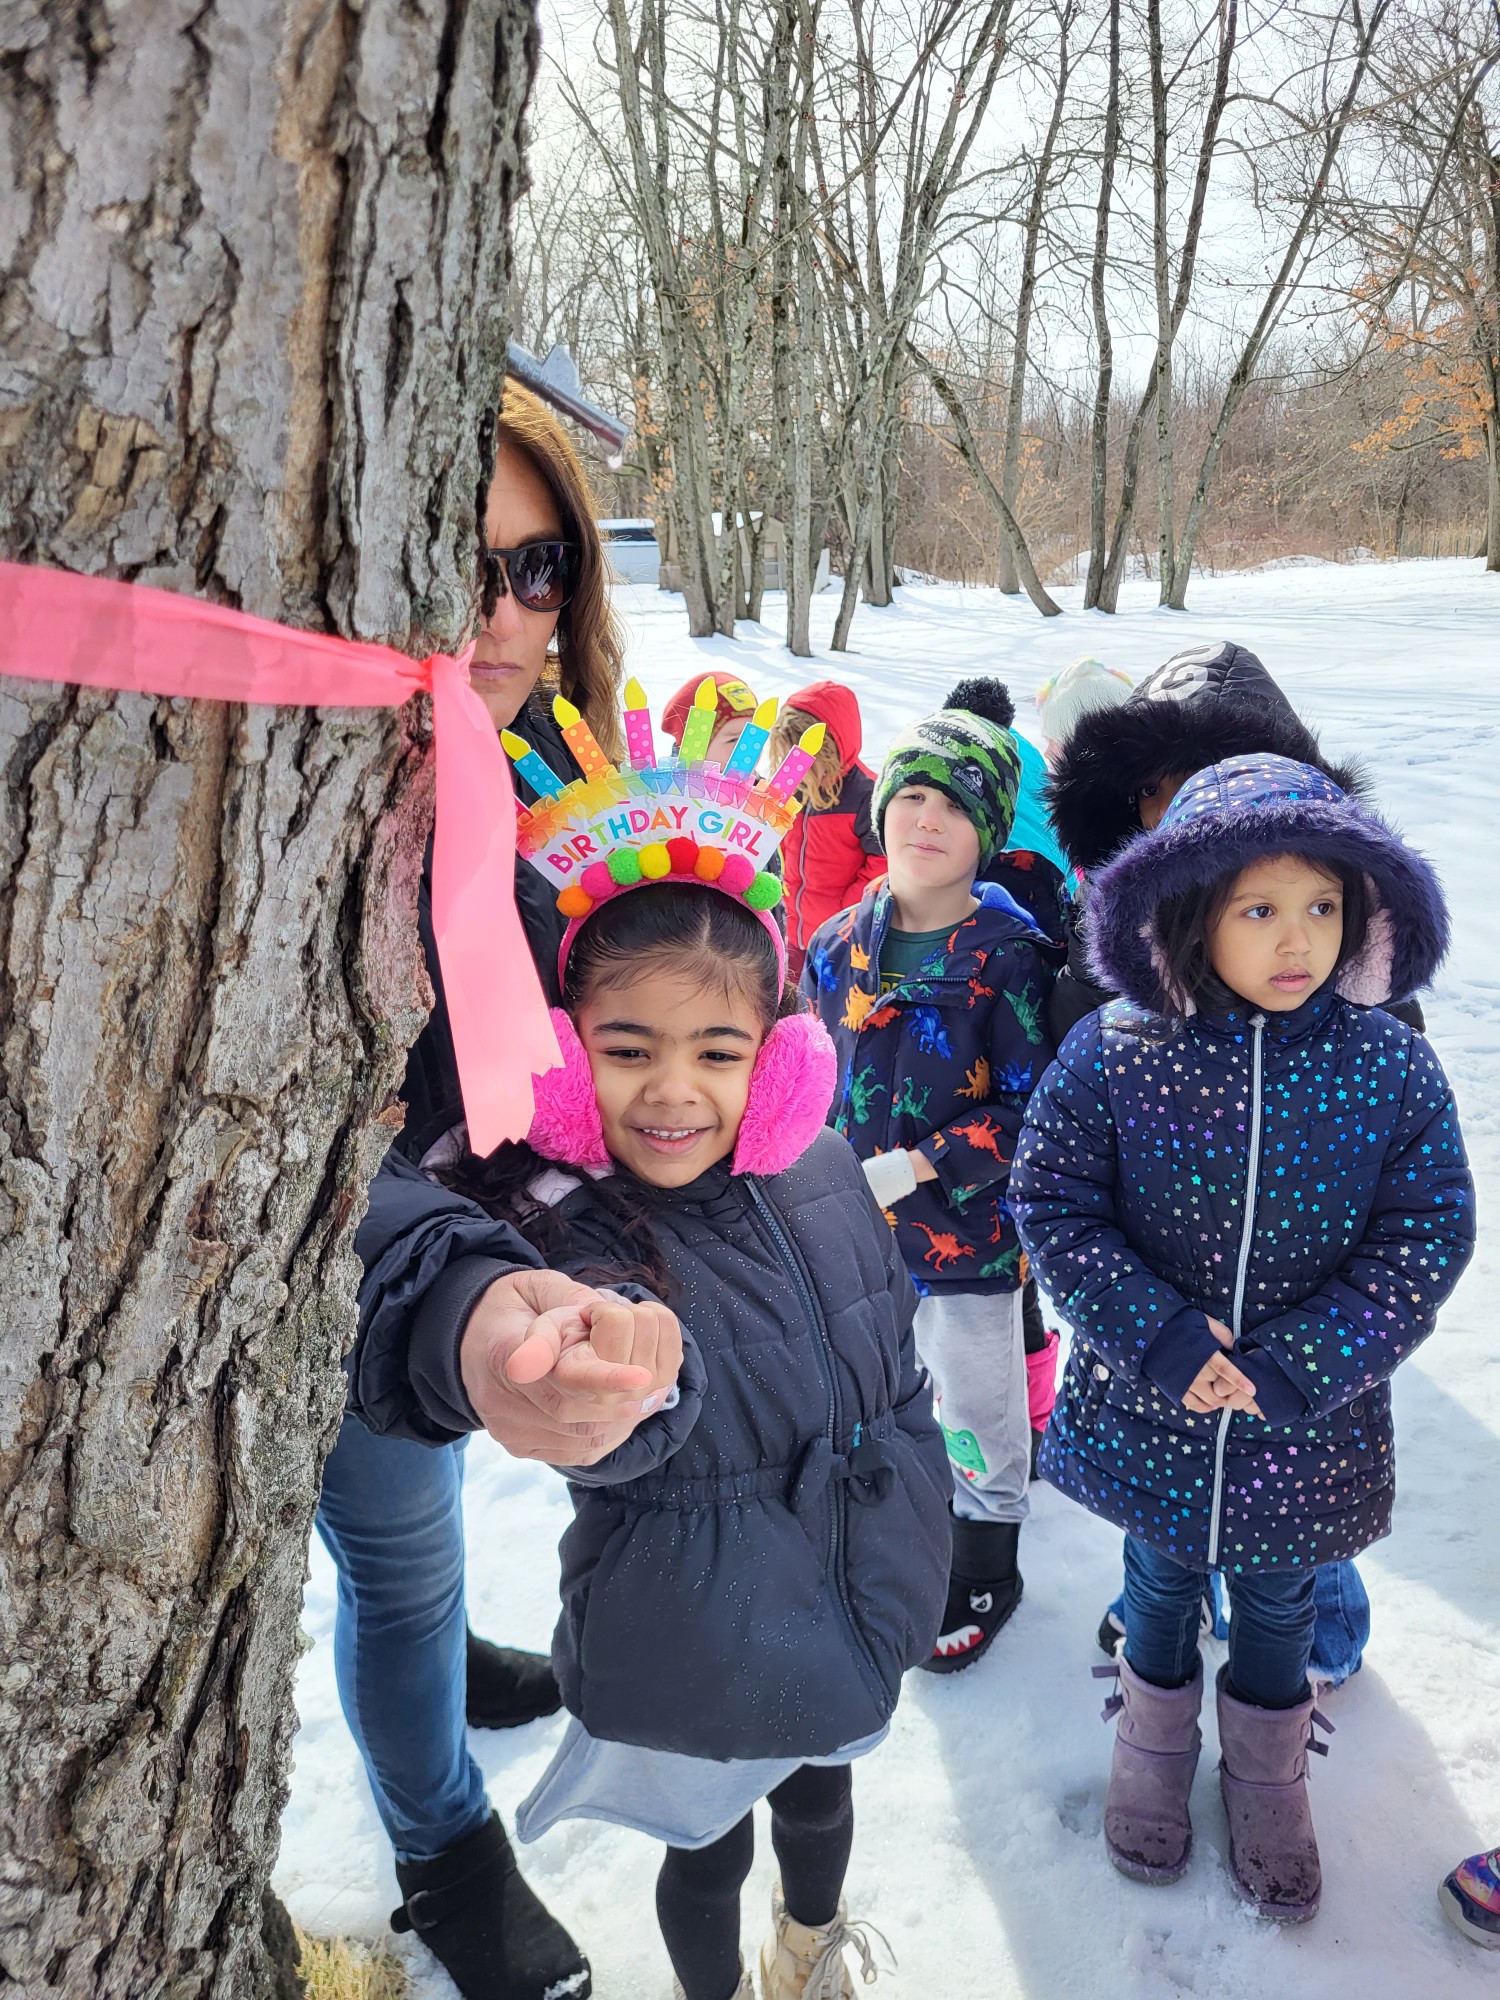 This birthday girl at Woodlawn got to taste maple sap directly from the tree they tapped in the school's yard.